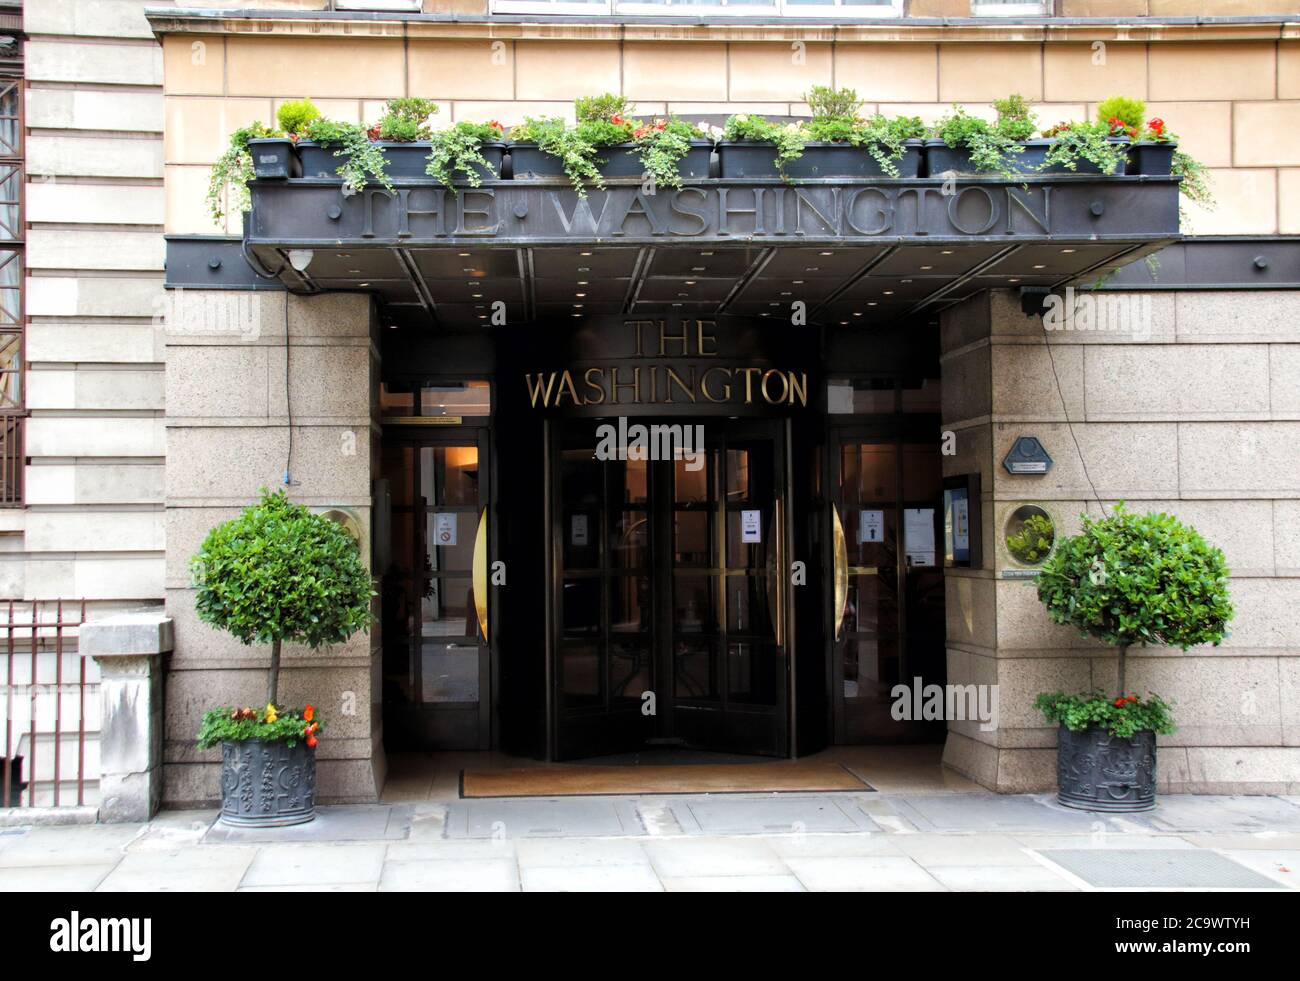 A view of the Washington Mayfair Hotel.Many of London's 5 star Luxury Hotels which are world renowned are still closed, despite the government's loosening of the hospitality sector's restrictions. With travel from the USA still minimal and weddings, society gatherings and corporate events at hugely reduced levels, these high end destinations are either closed or running on skeleton staffing. Stock Photo